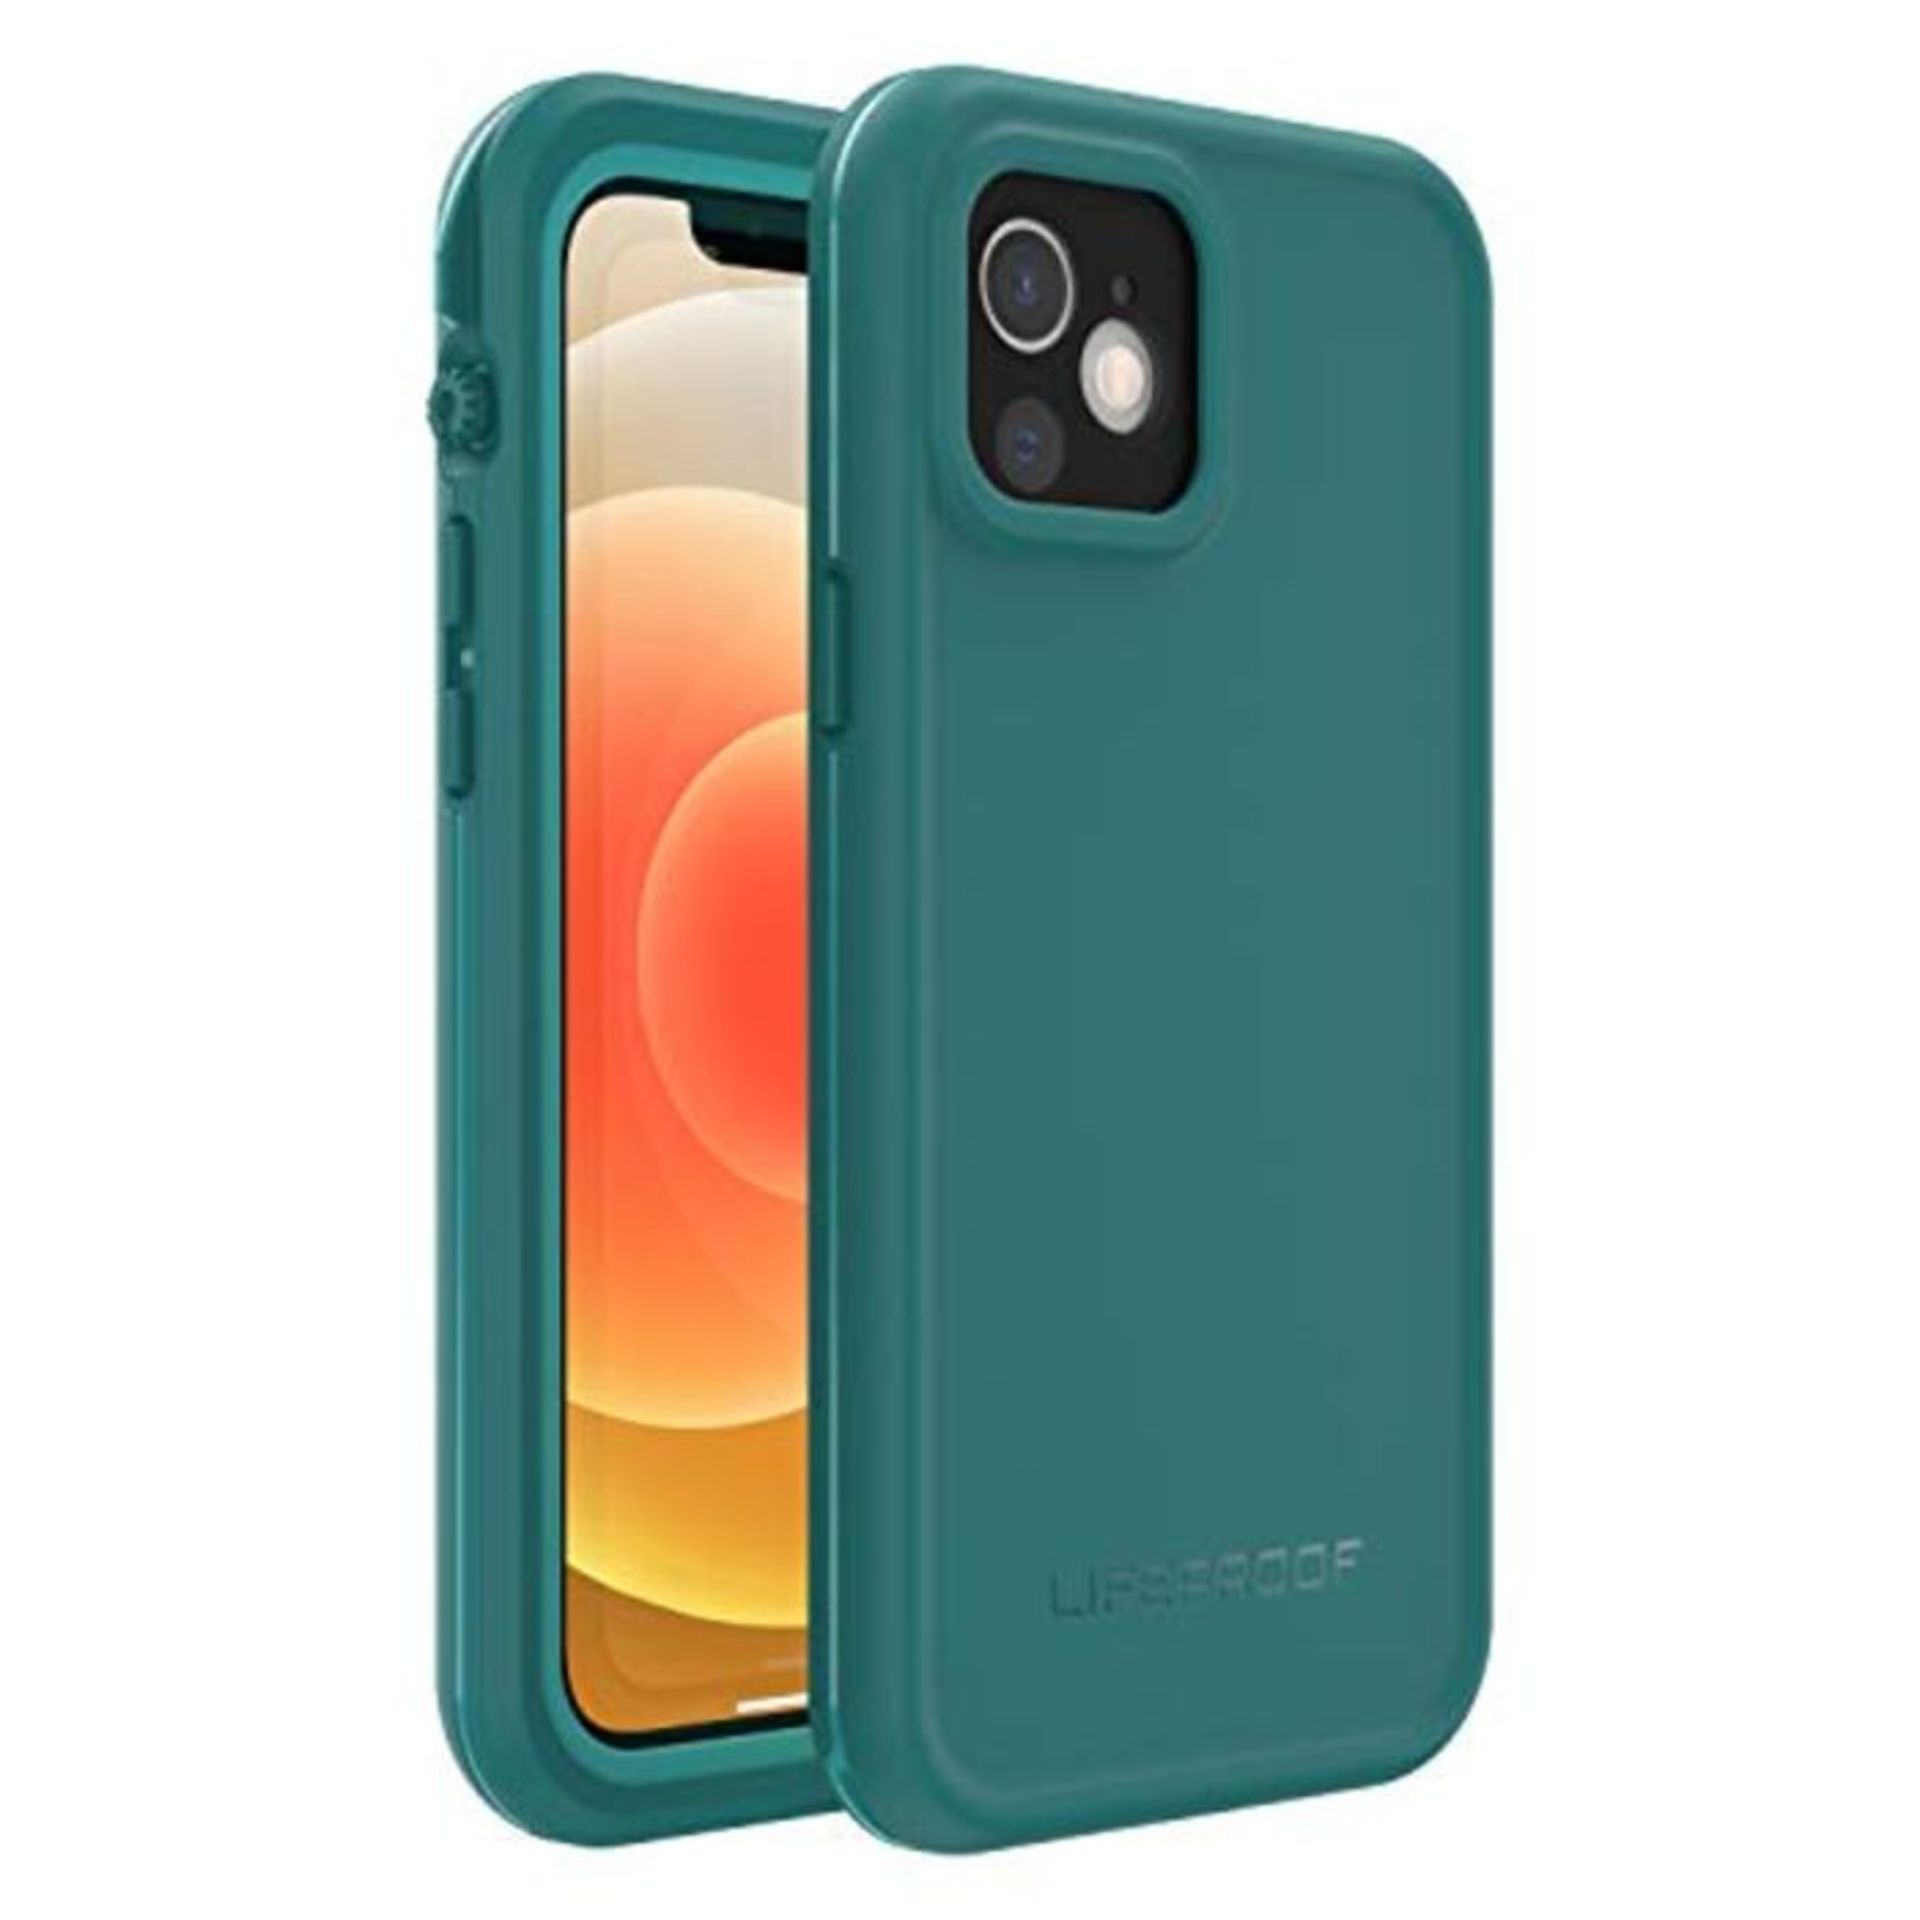 RRP £50.00 LifeProof for iPhone 12, Waterproof Drop Protective Case, Fre Series, Blue